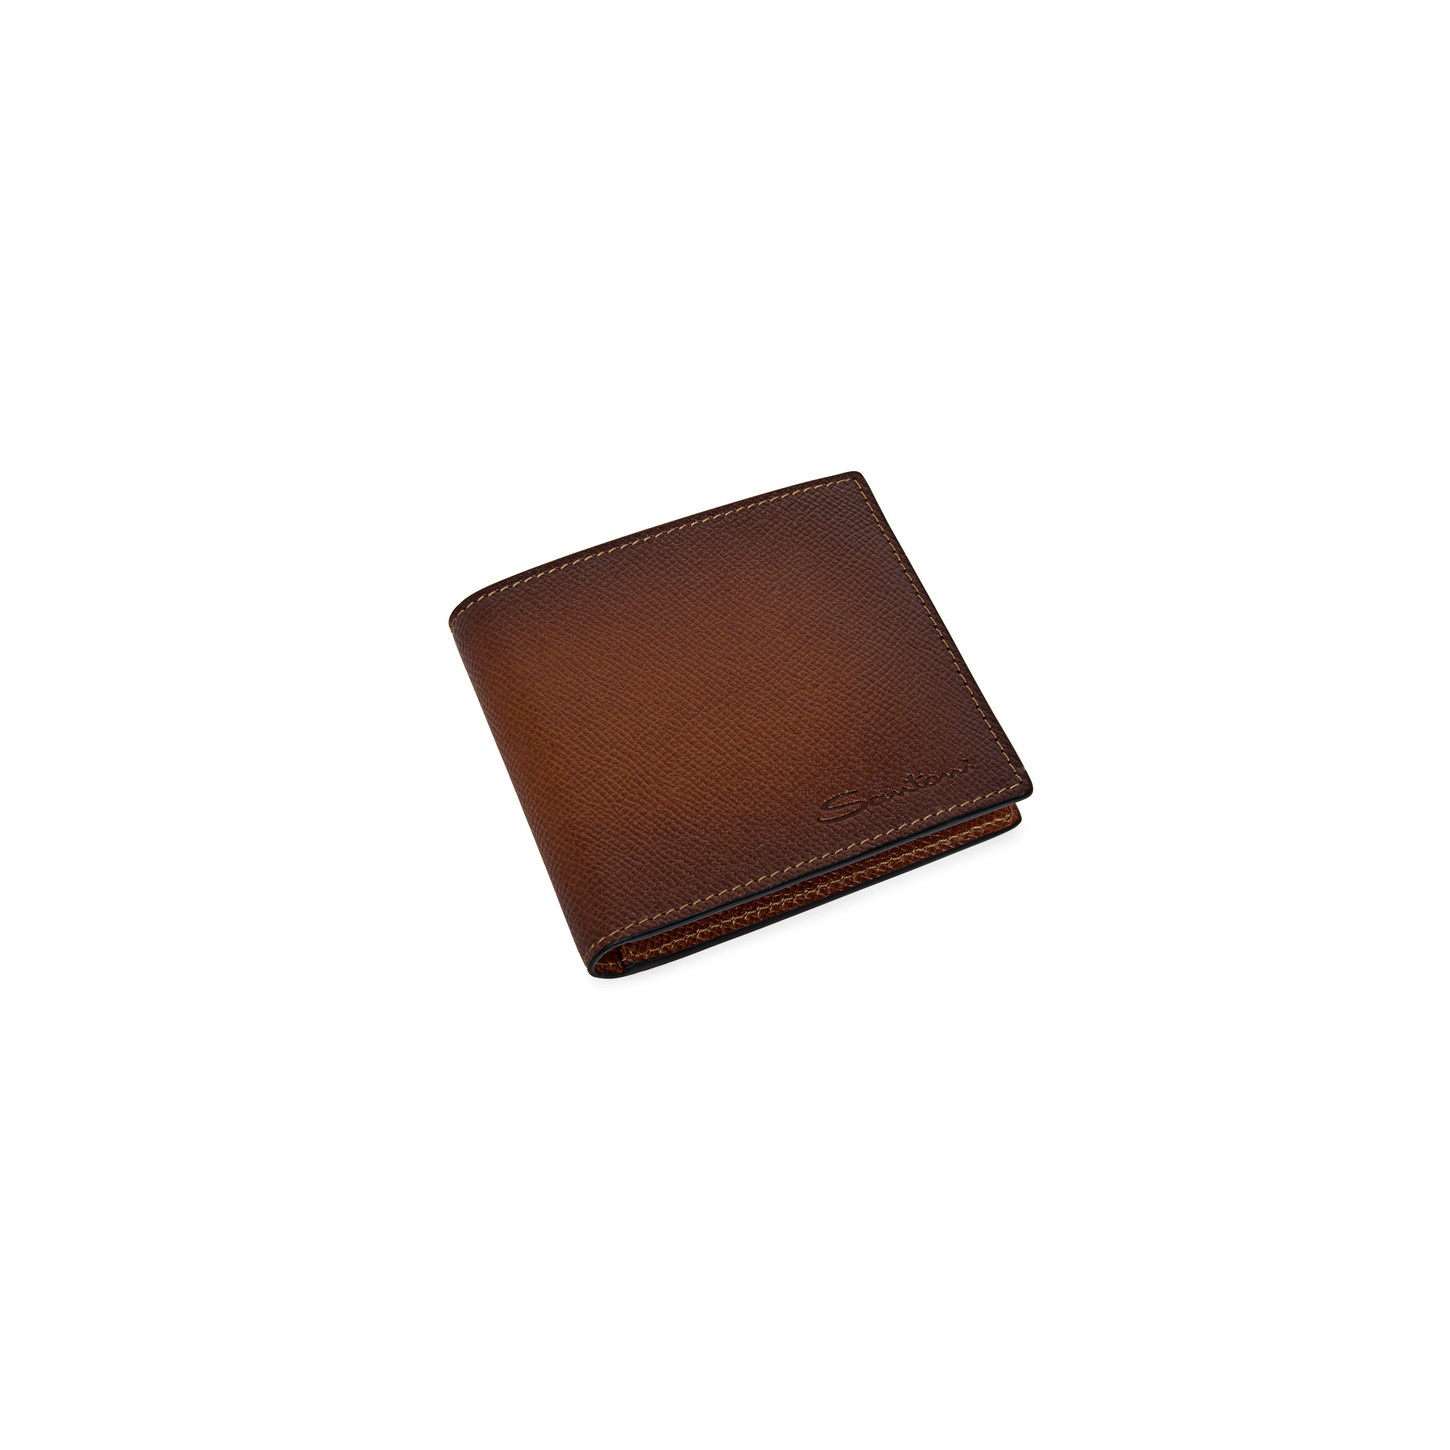 Brown saffiano leather wallet - 5